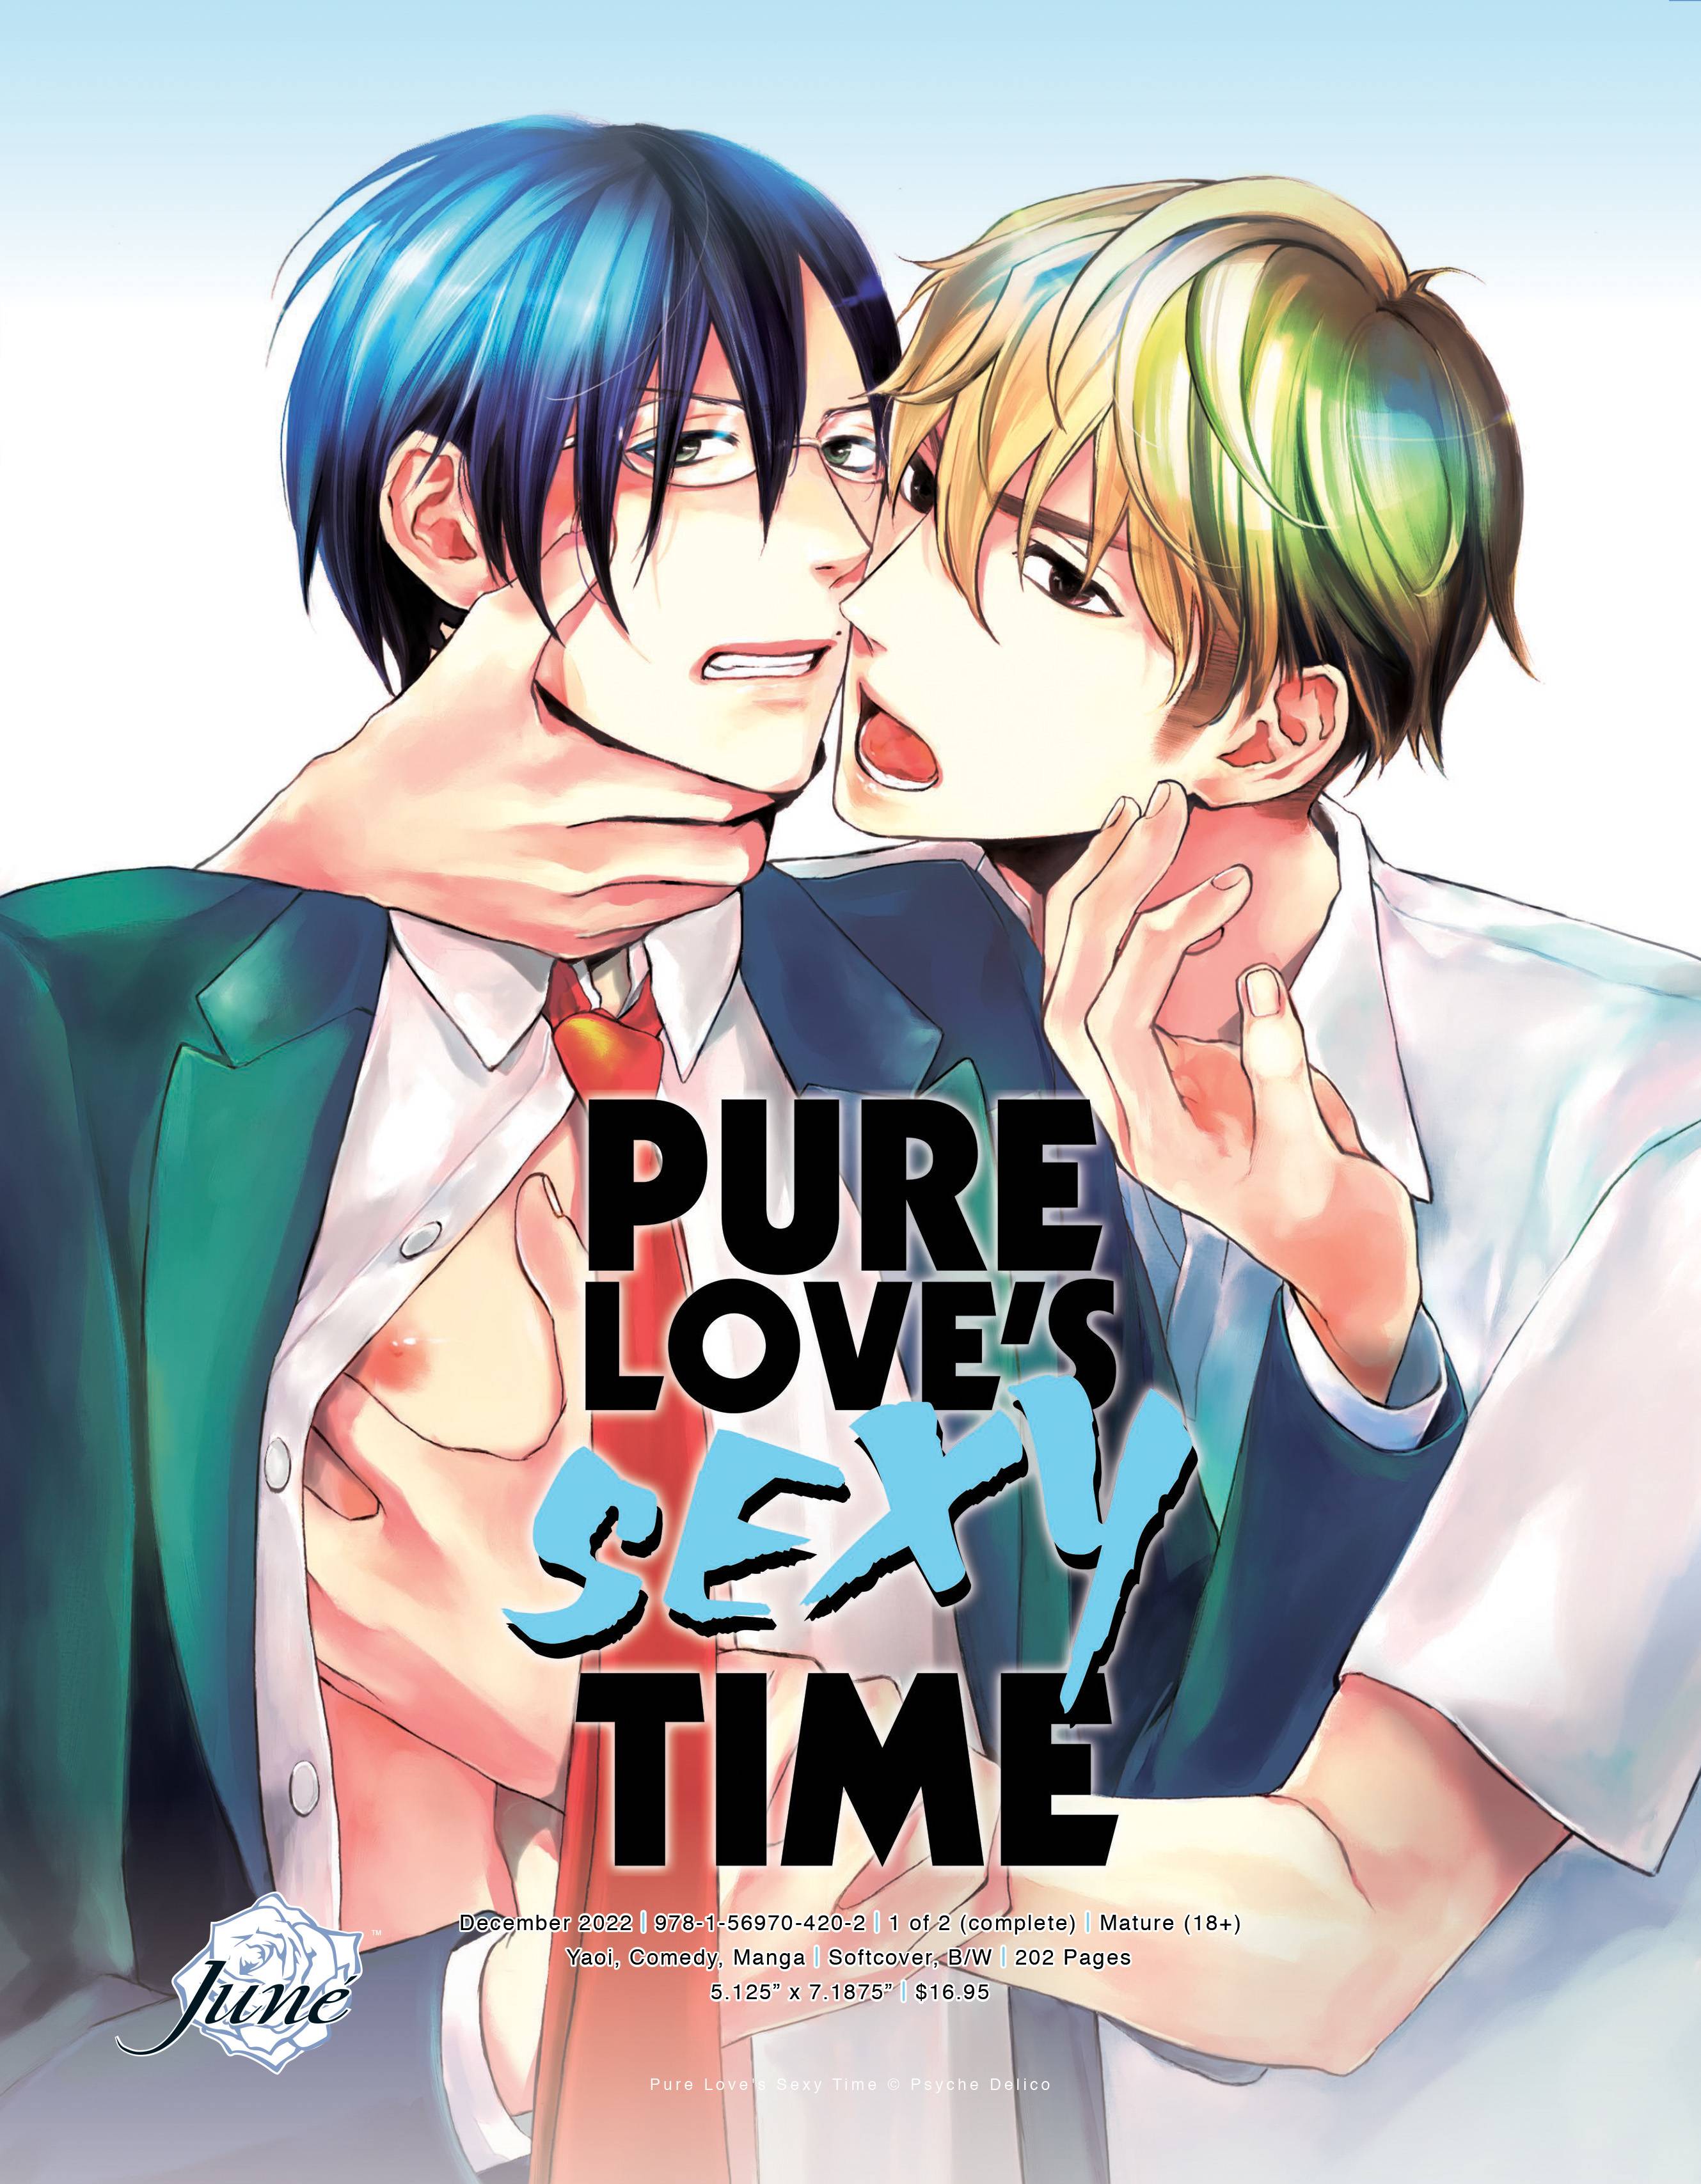 PURE LOVES SEXY TIME VOL 01 (OF 2)